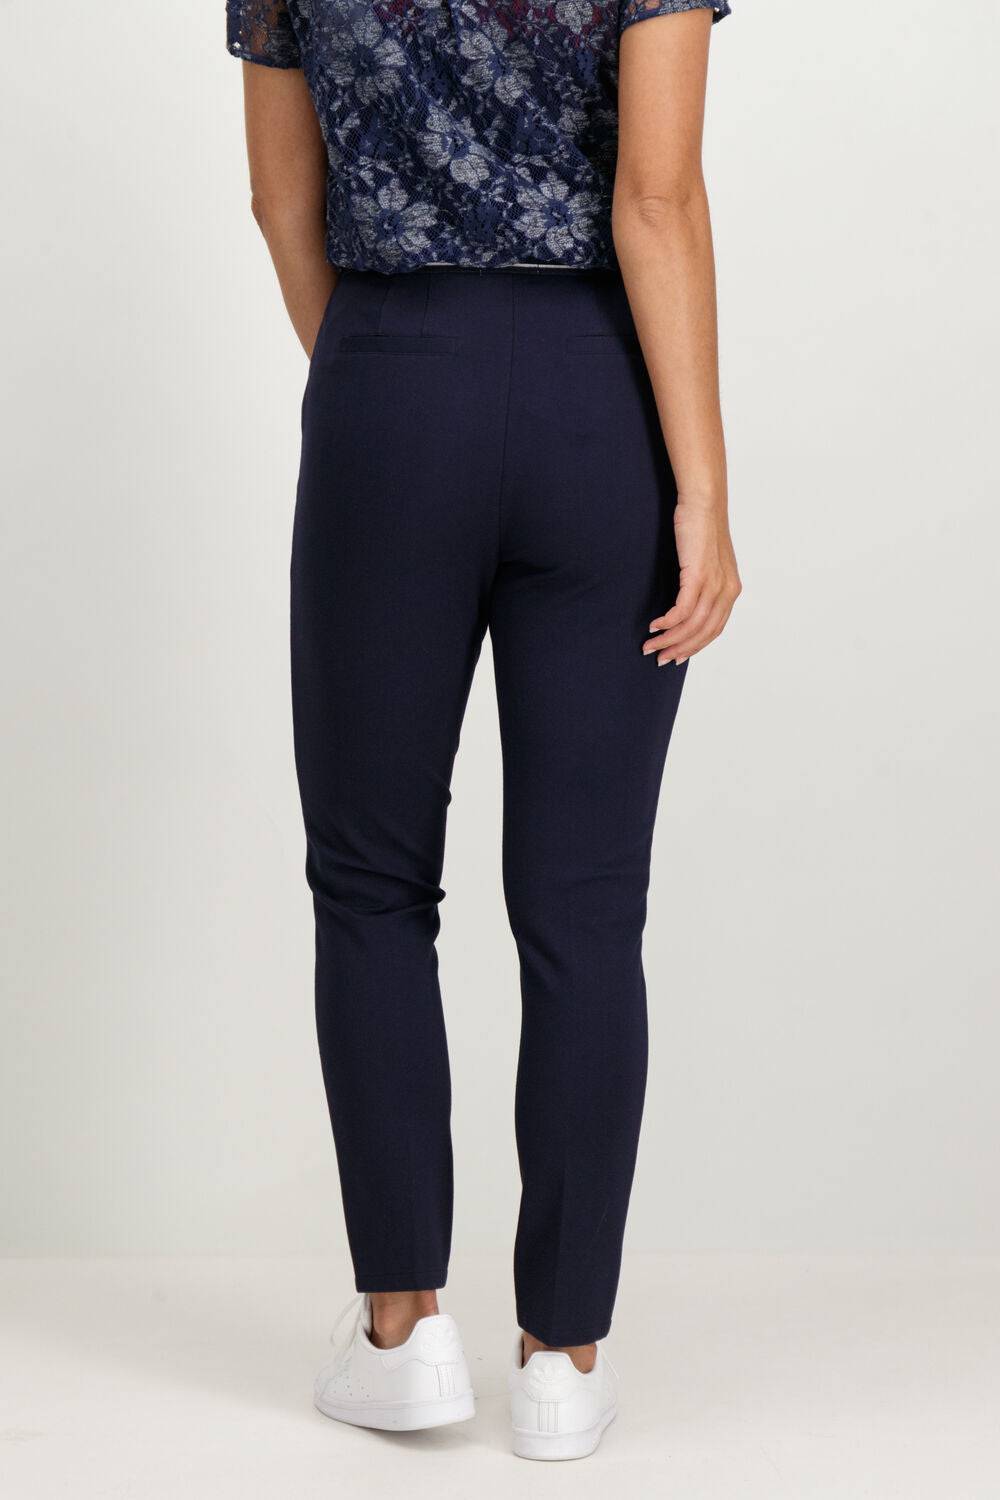 Navy Blue Garcia Trousers with a zip closure - Your Style Your Story